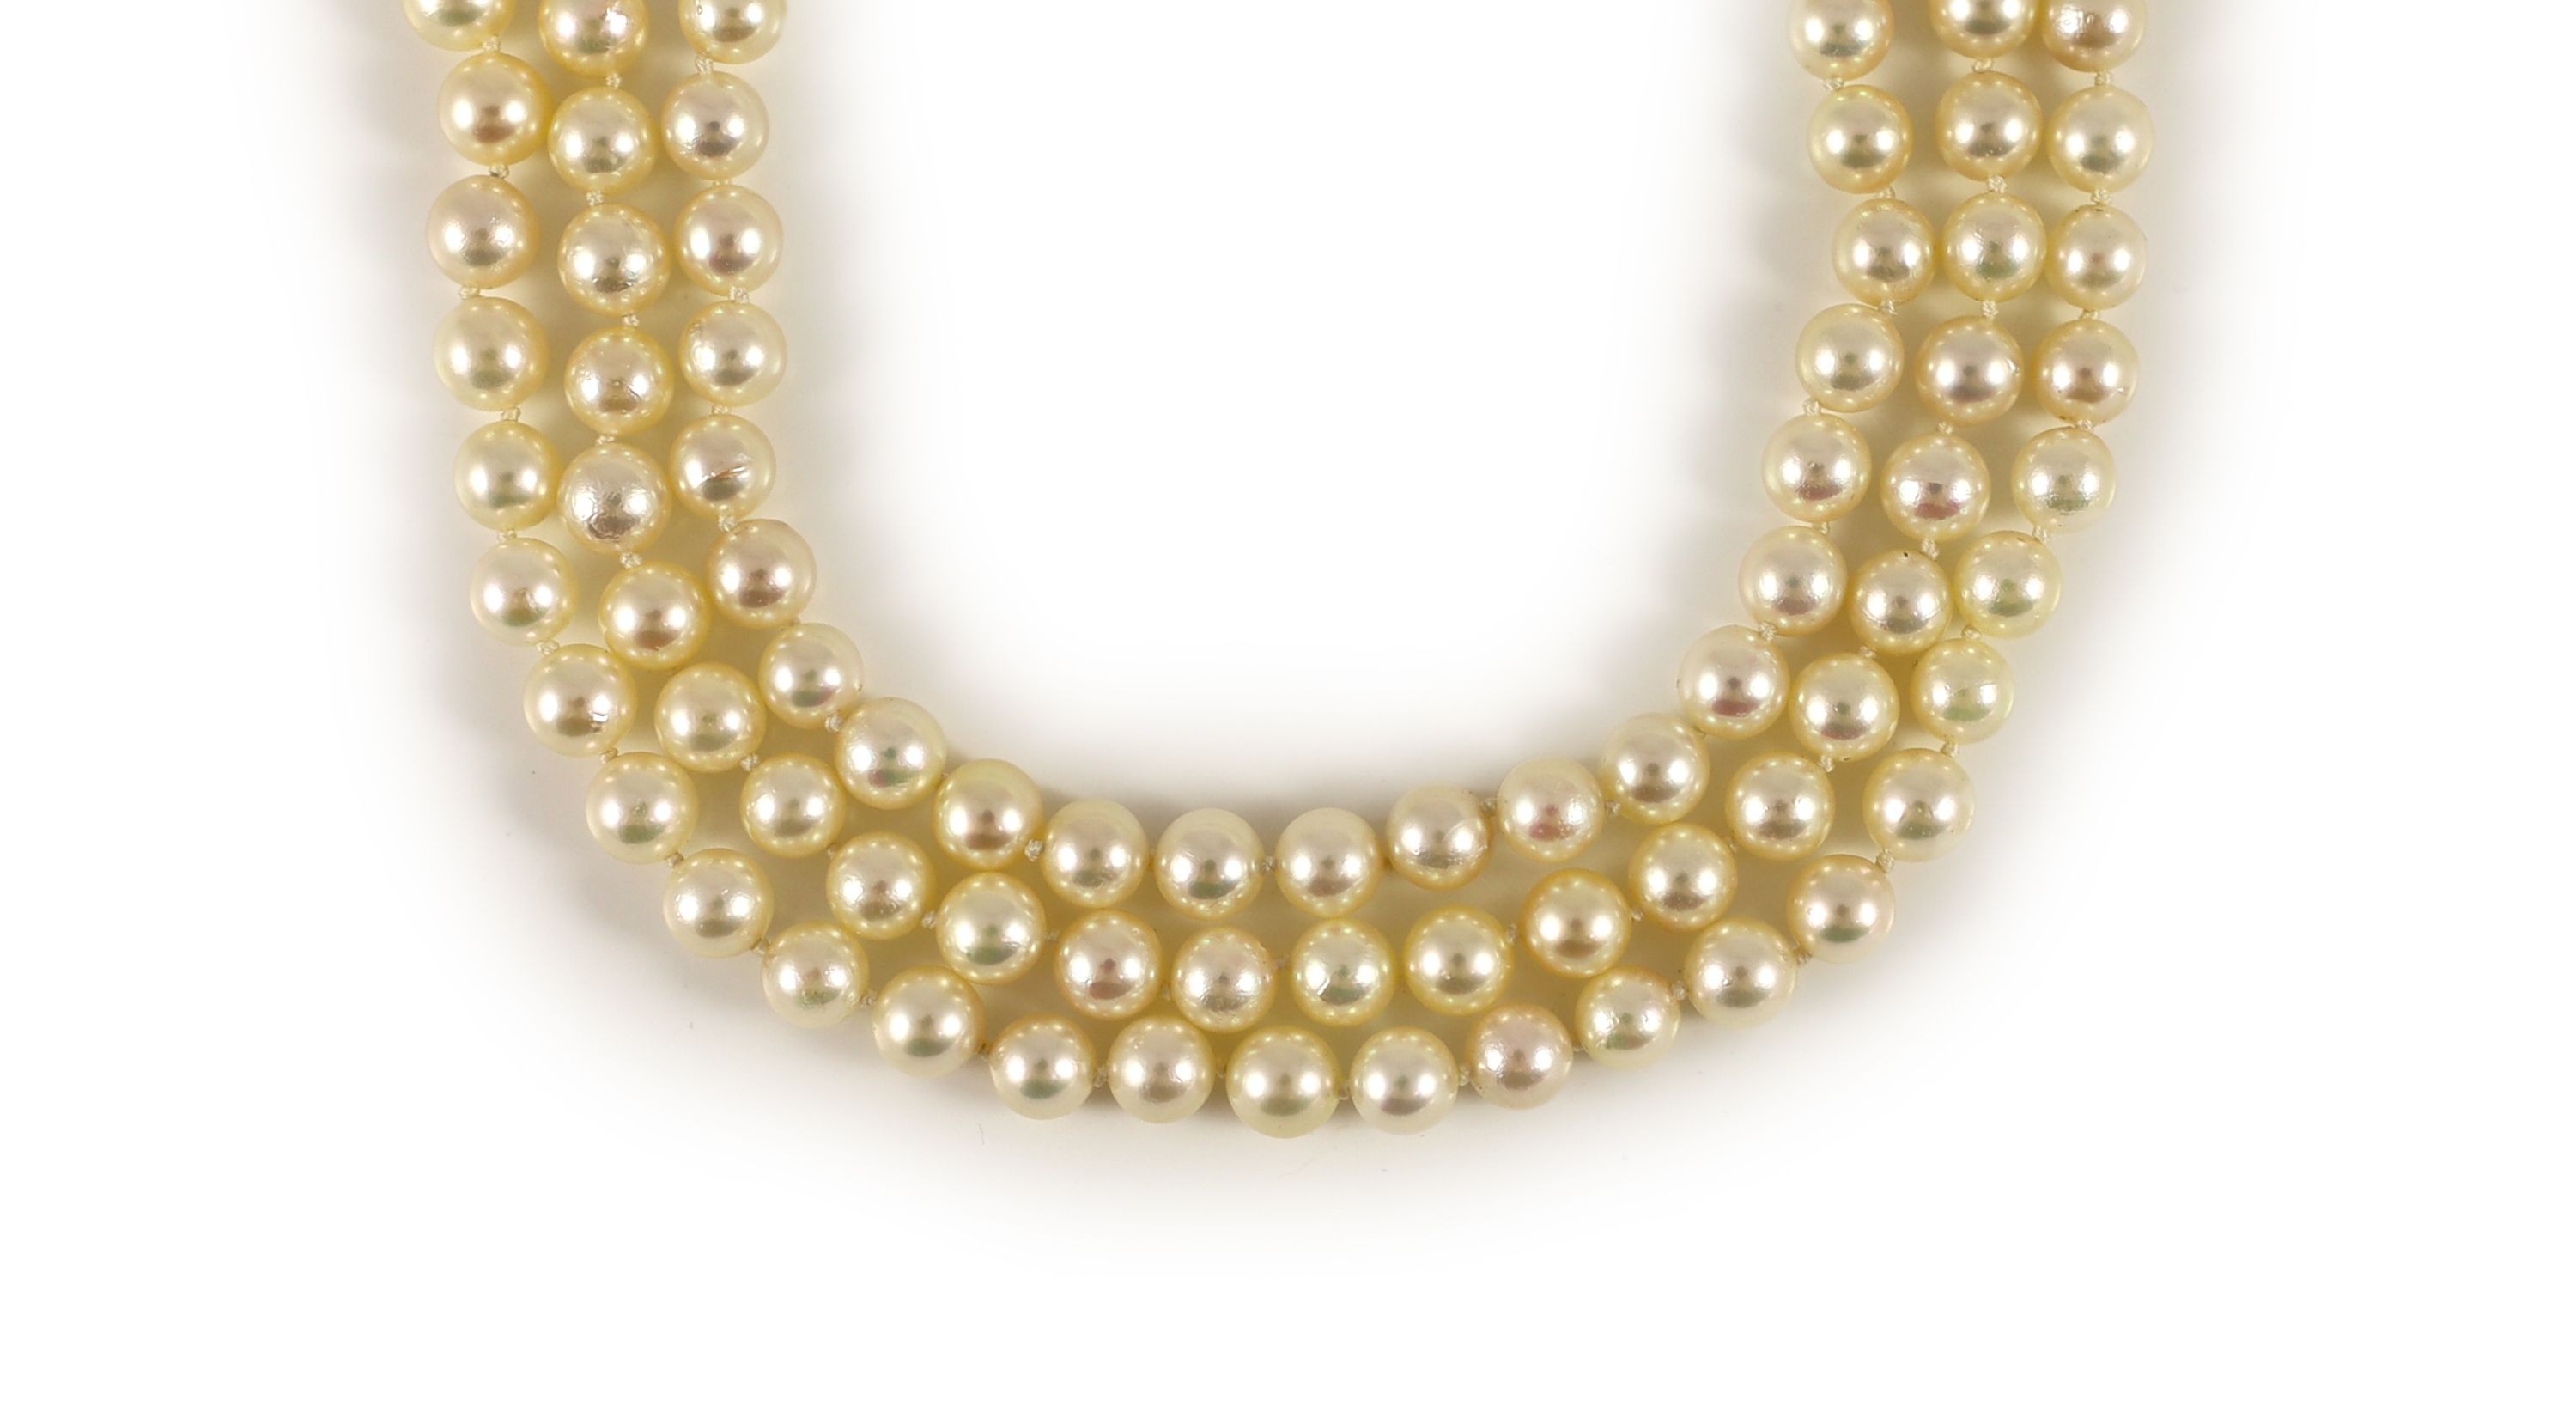 A modern triple strand cultured pearl necklace, with a 14k gold, cultured pearl and diamond set clasp